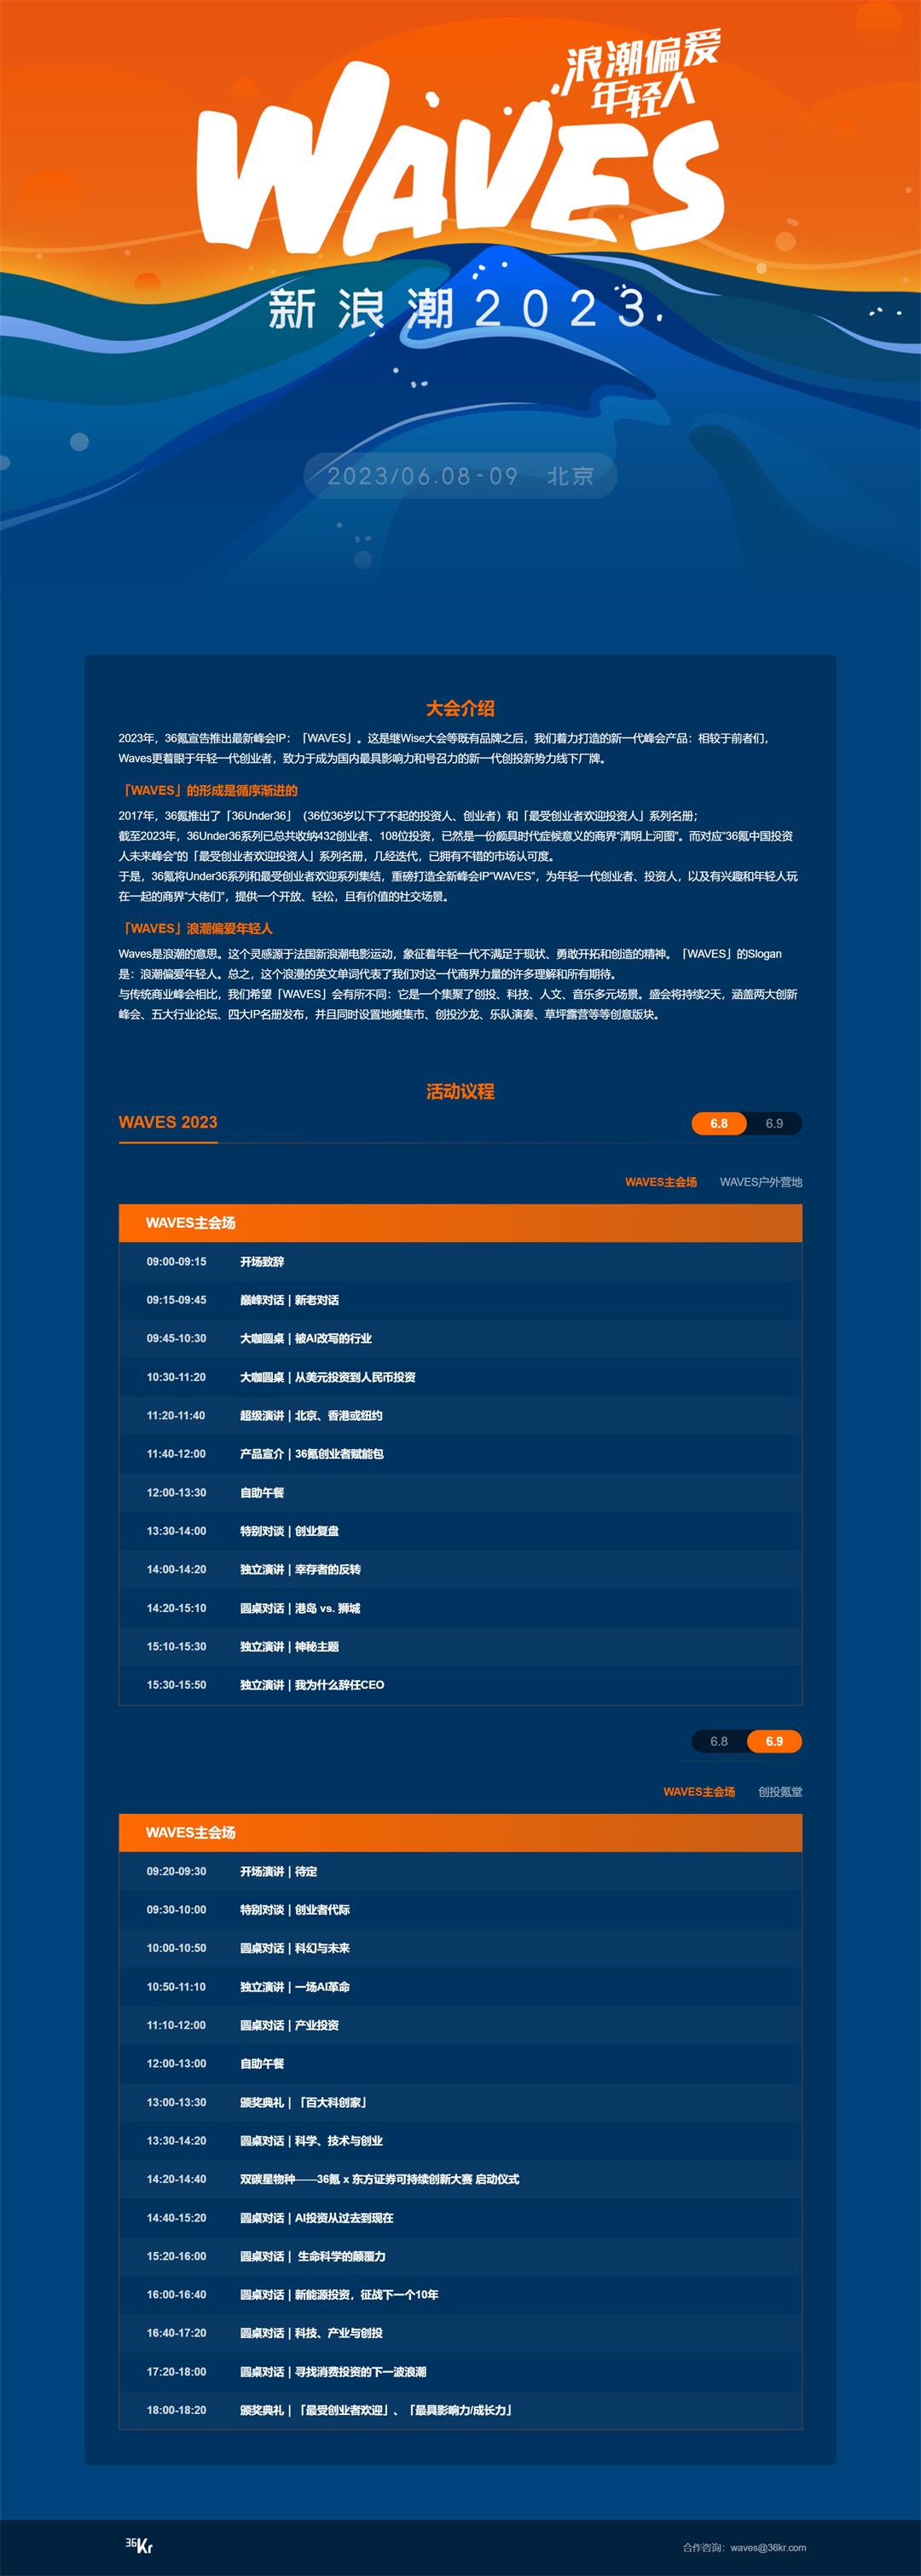 WAVES 新浪潮 2023 - intro page.jpg